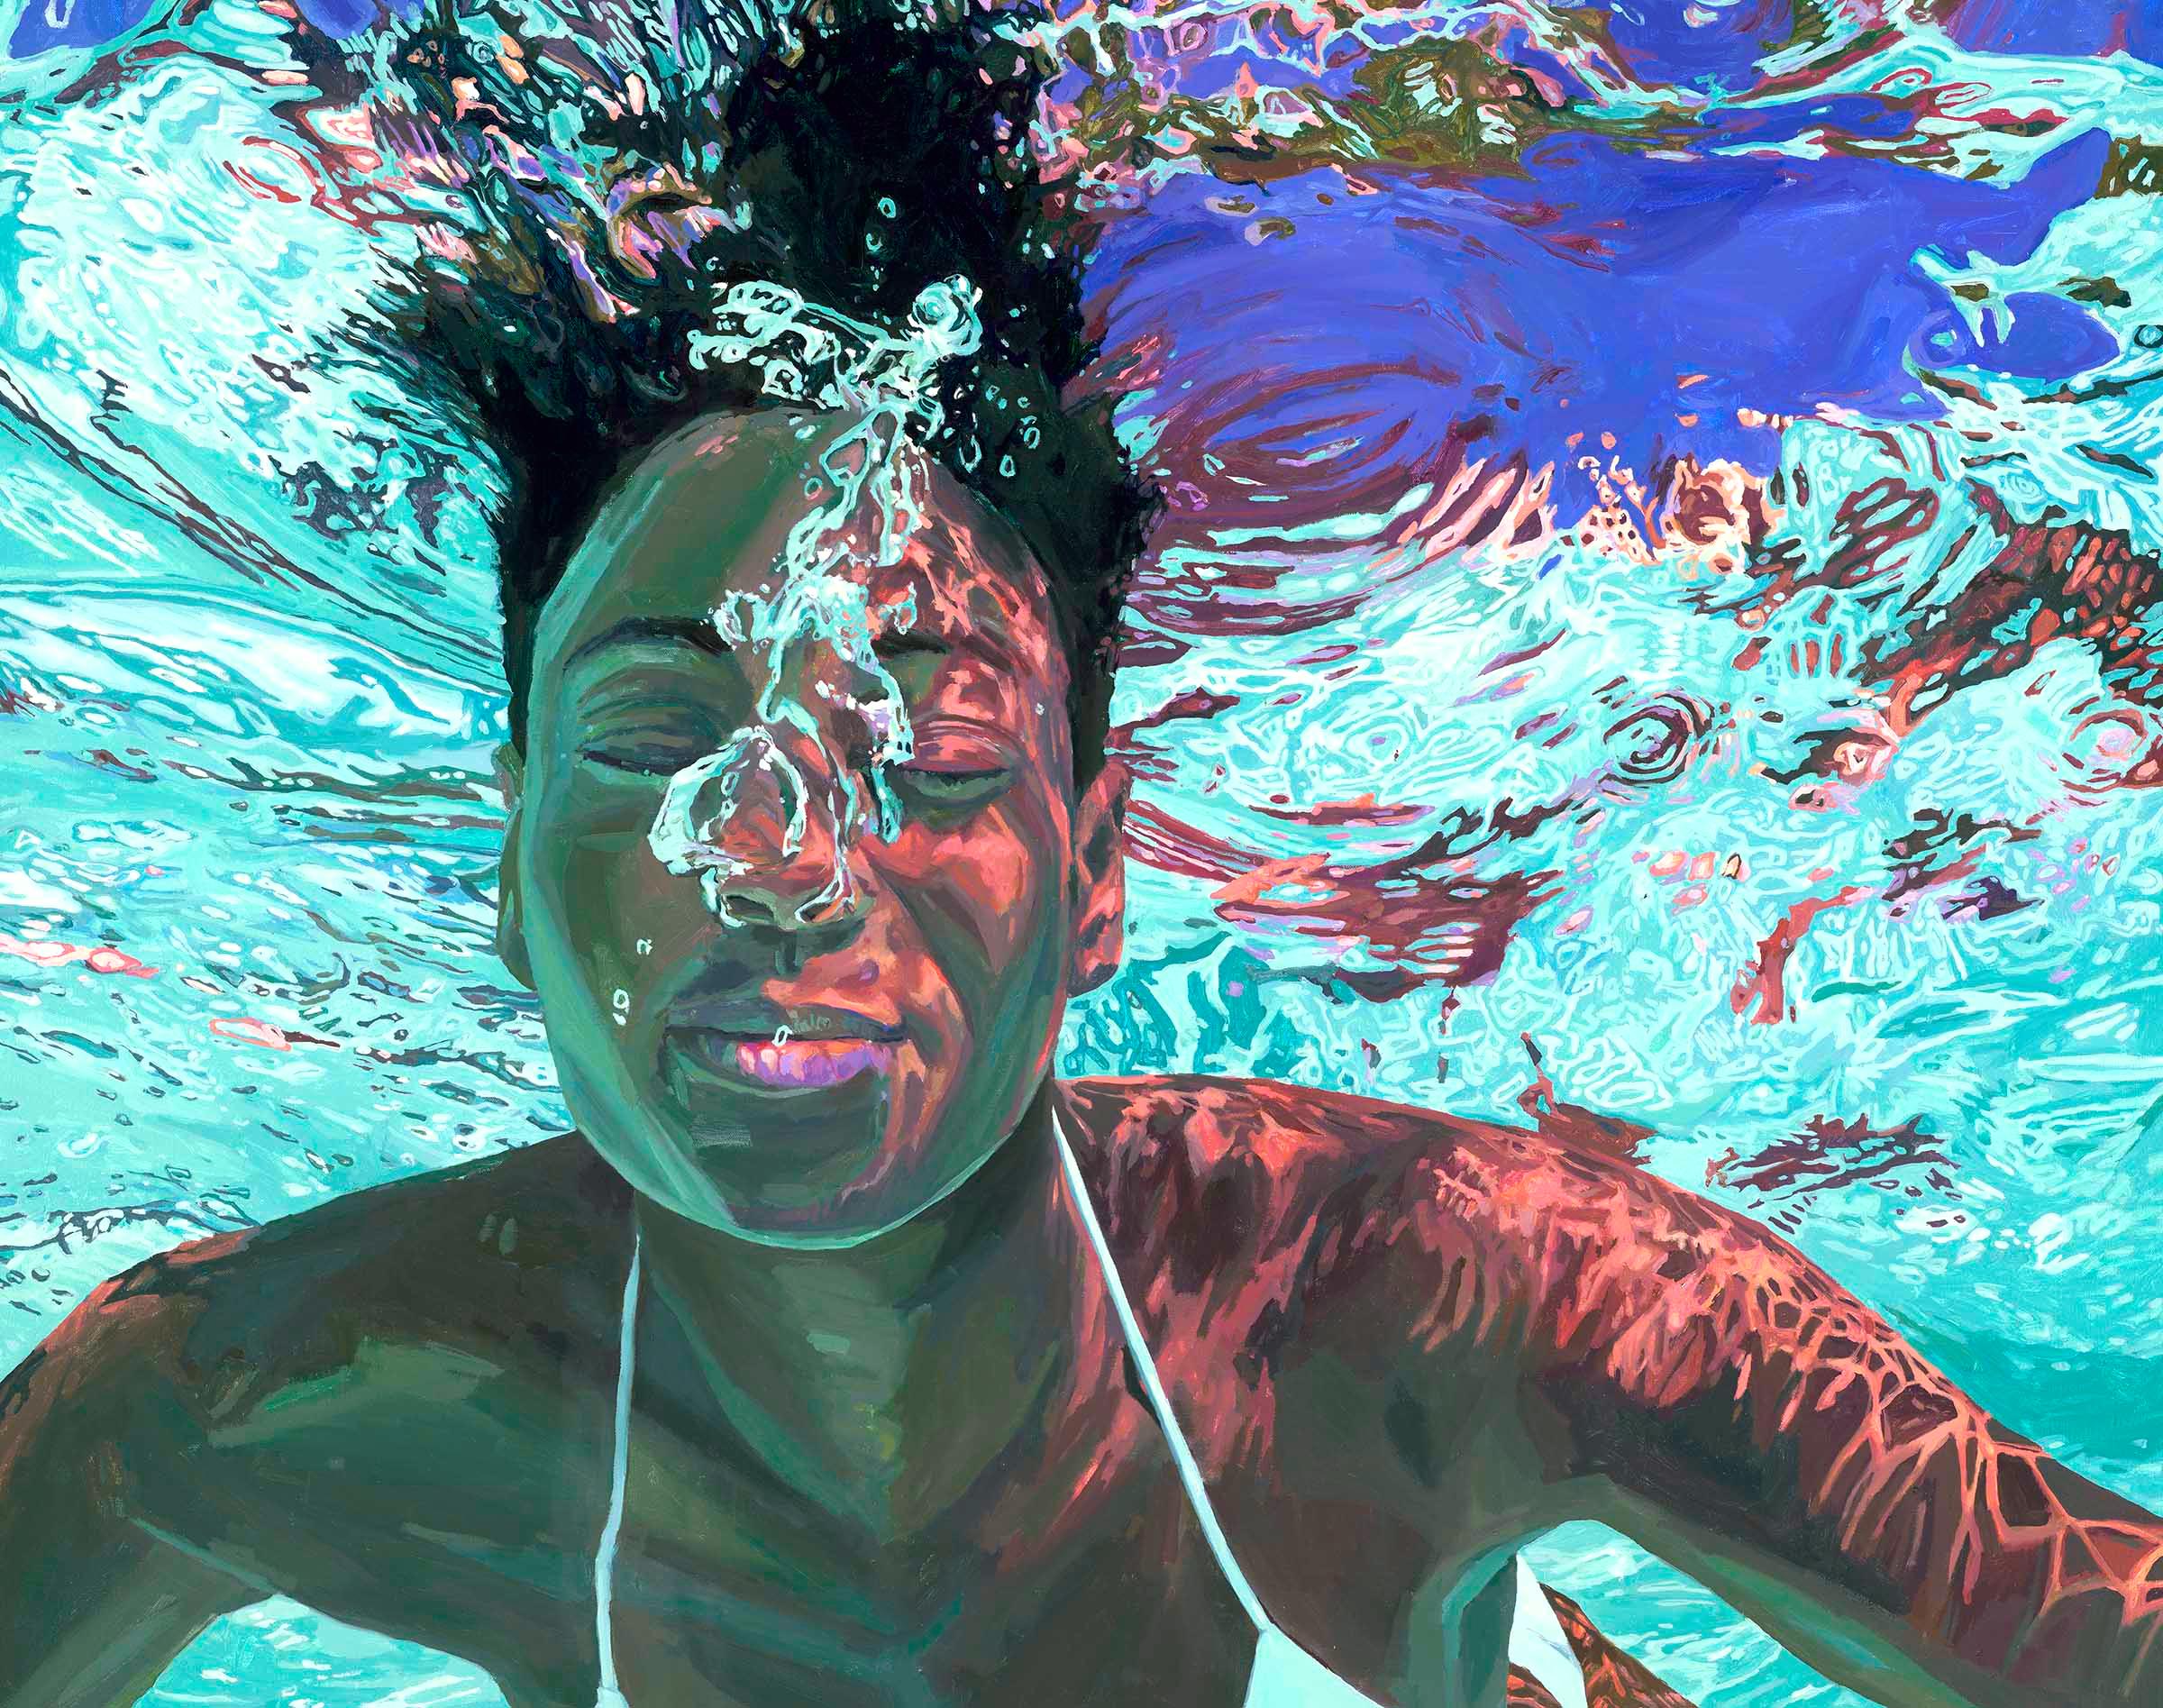 Rising Tides: Photorealist Figurative Painting of a Woman in Aqua Pool Water